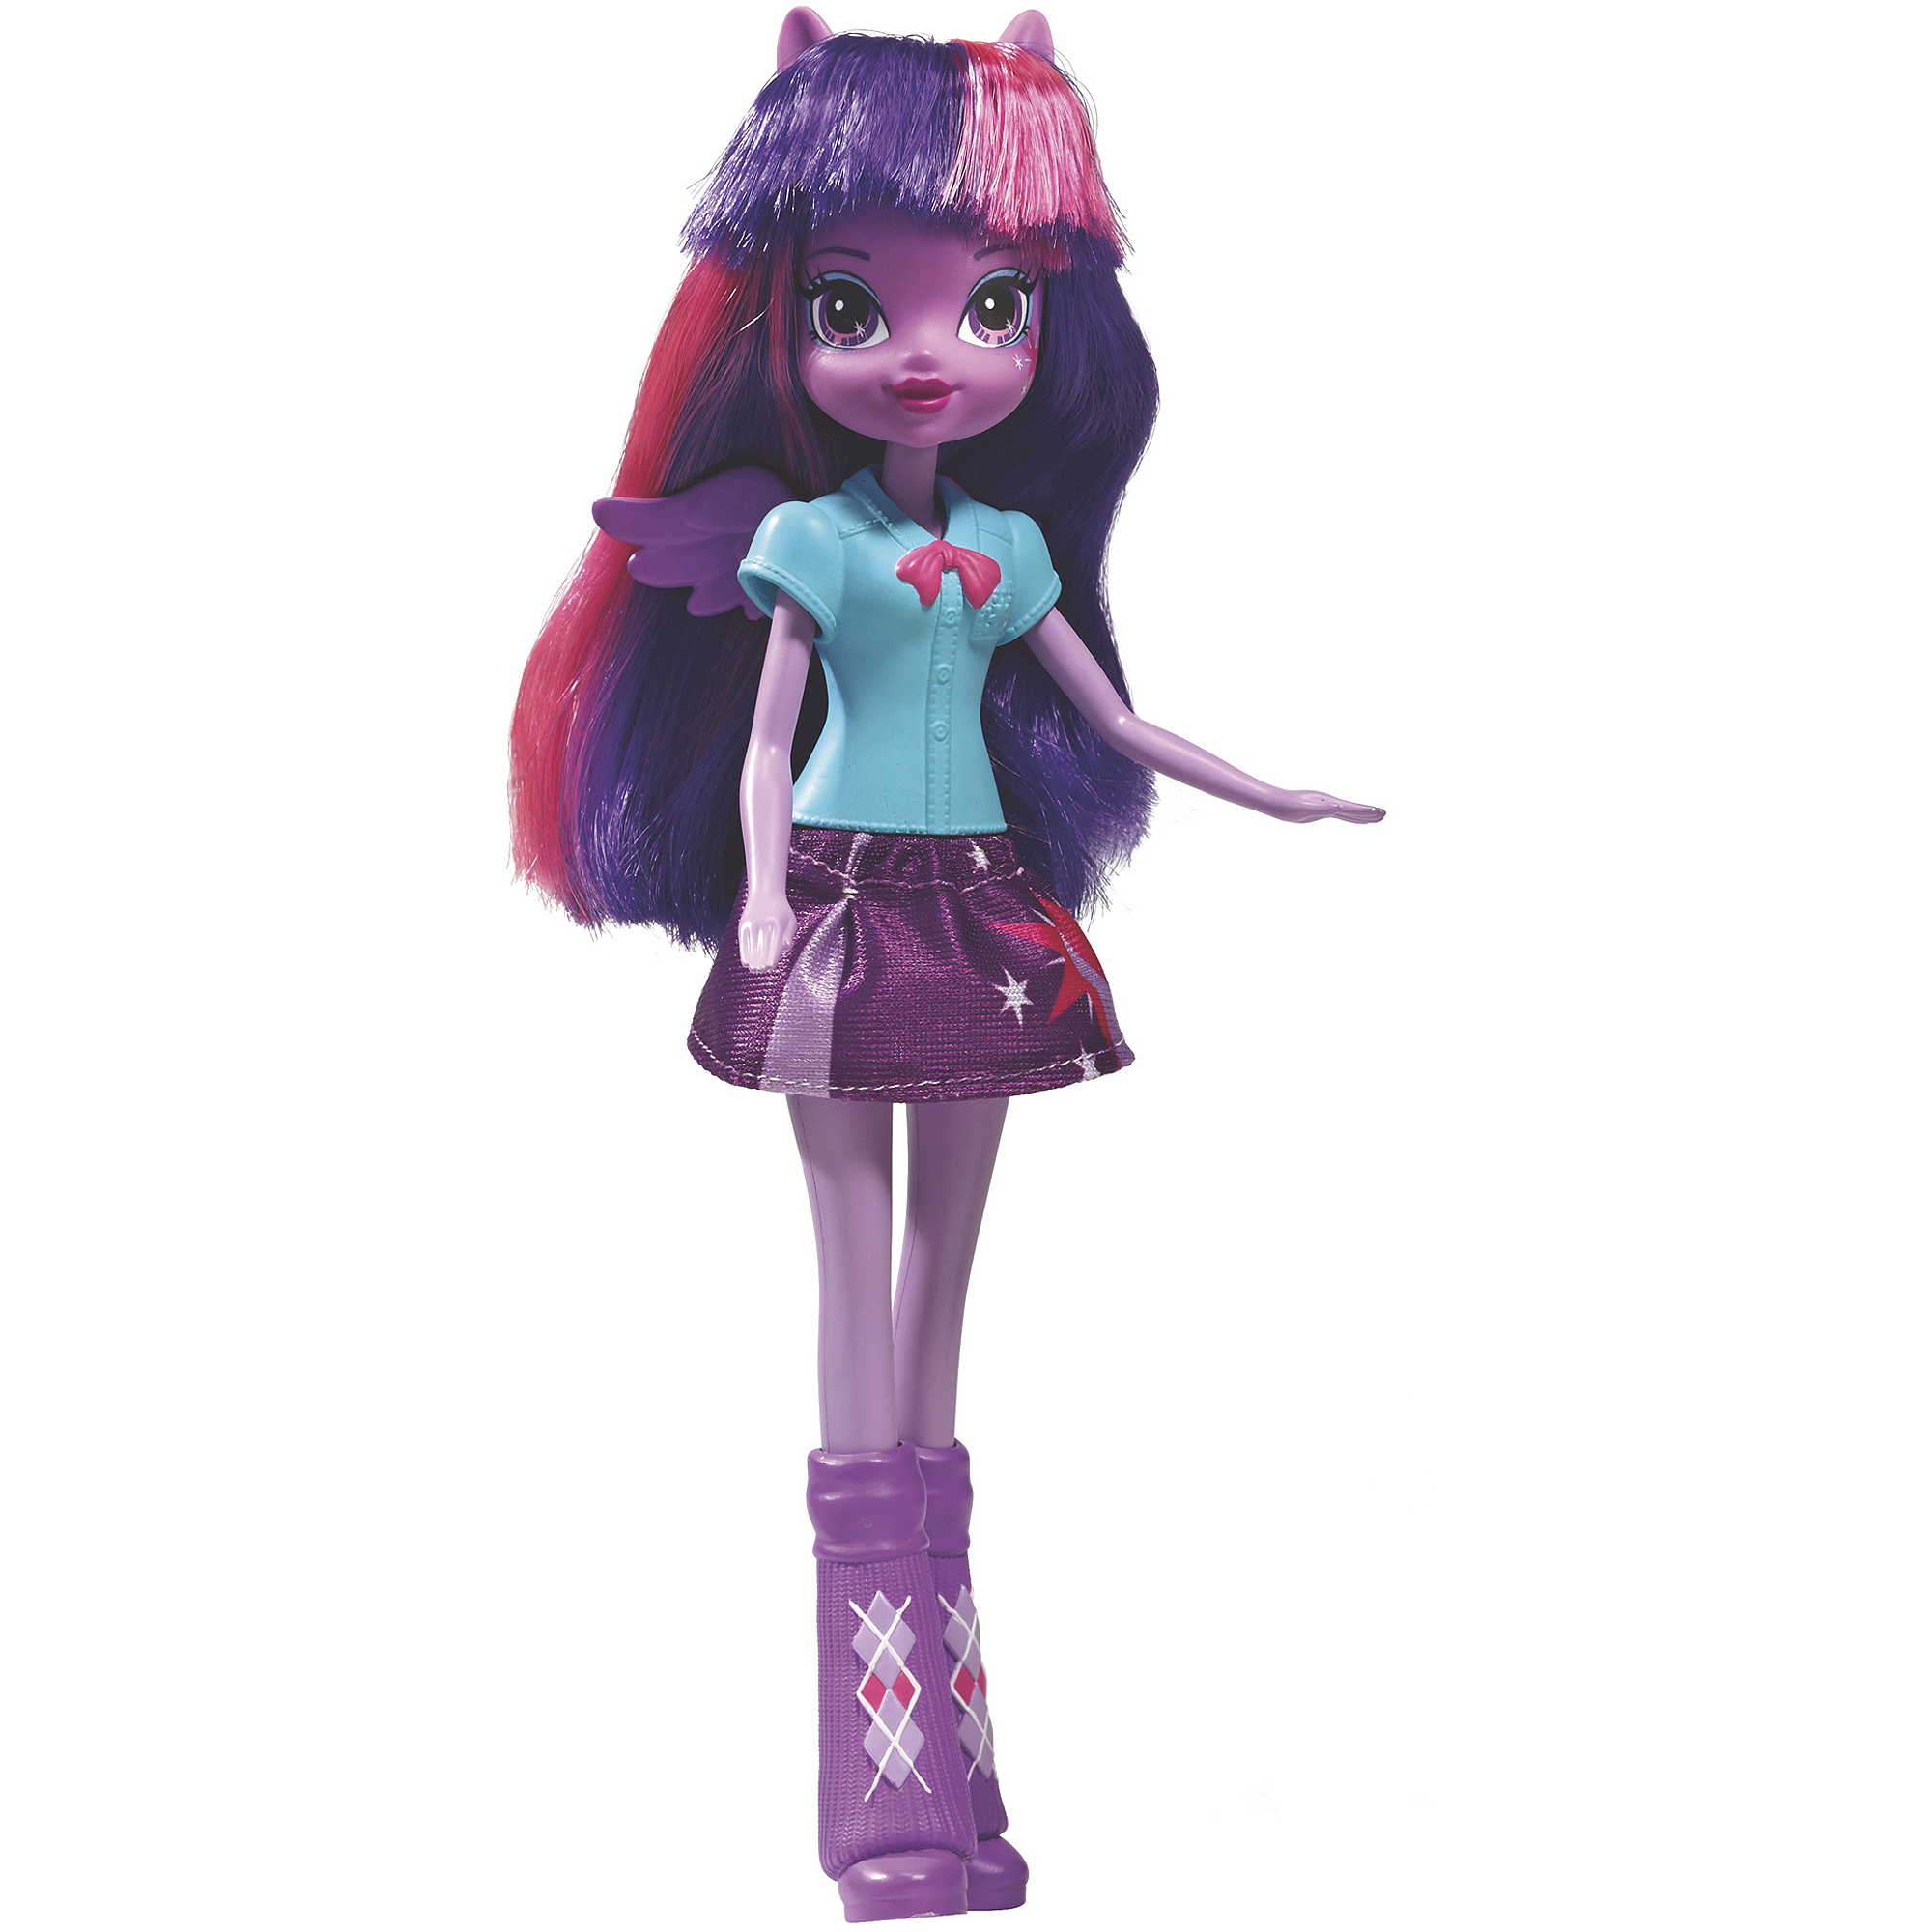 My Little Pony Equestria Girls Collection Twilight Sparkle Doll - image 3 of 10